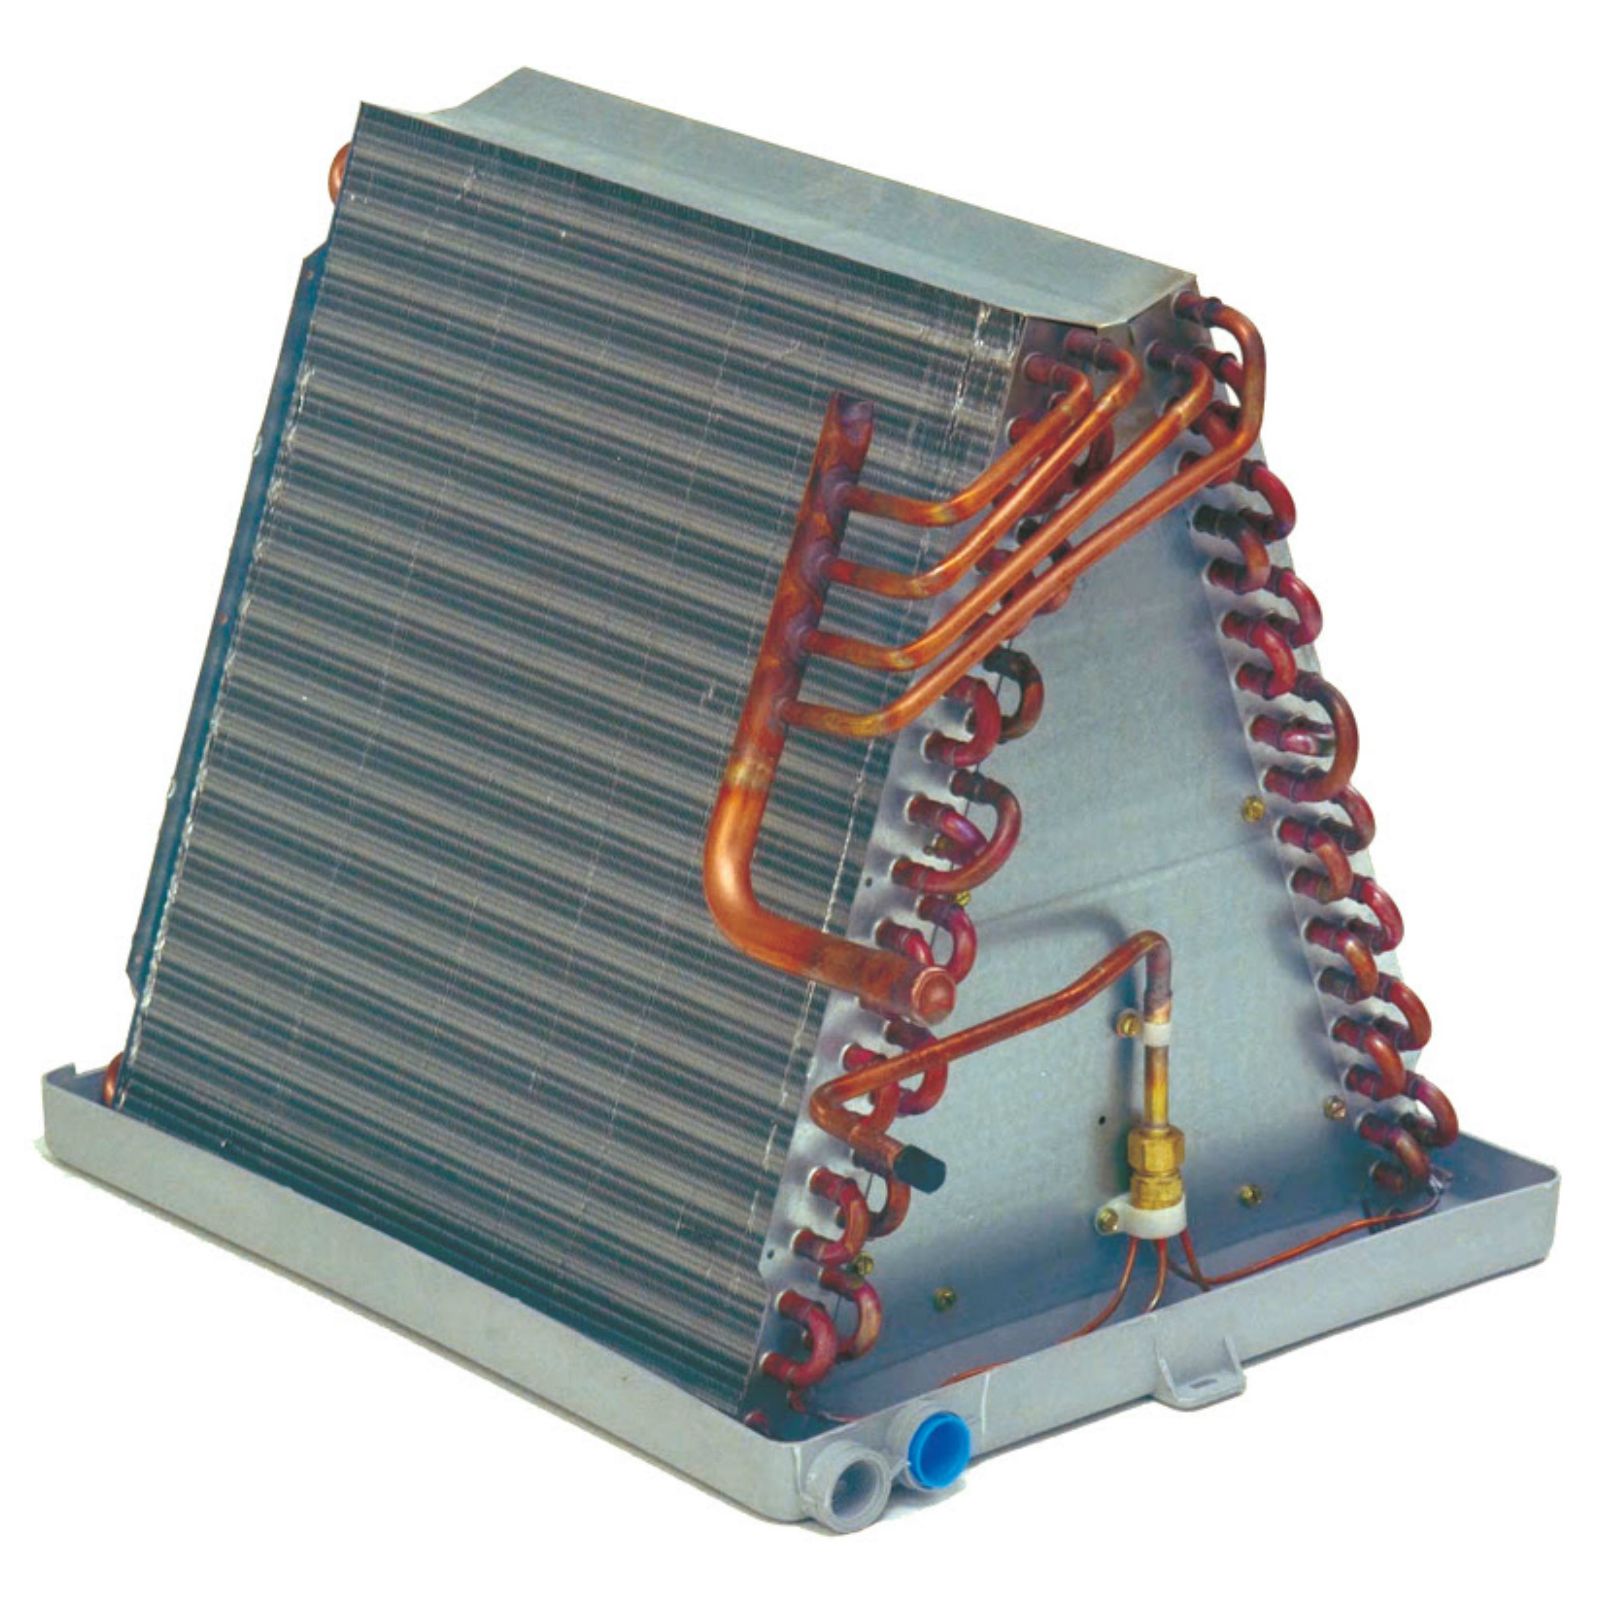 Tempstar EPA24B15WT - 2 Ton, R22, Uncased, A Type Piston Replacement Evaporator Coil, 14.75" Drain Pan (for 15.5" Cabinet)